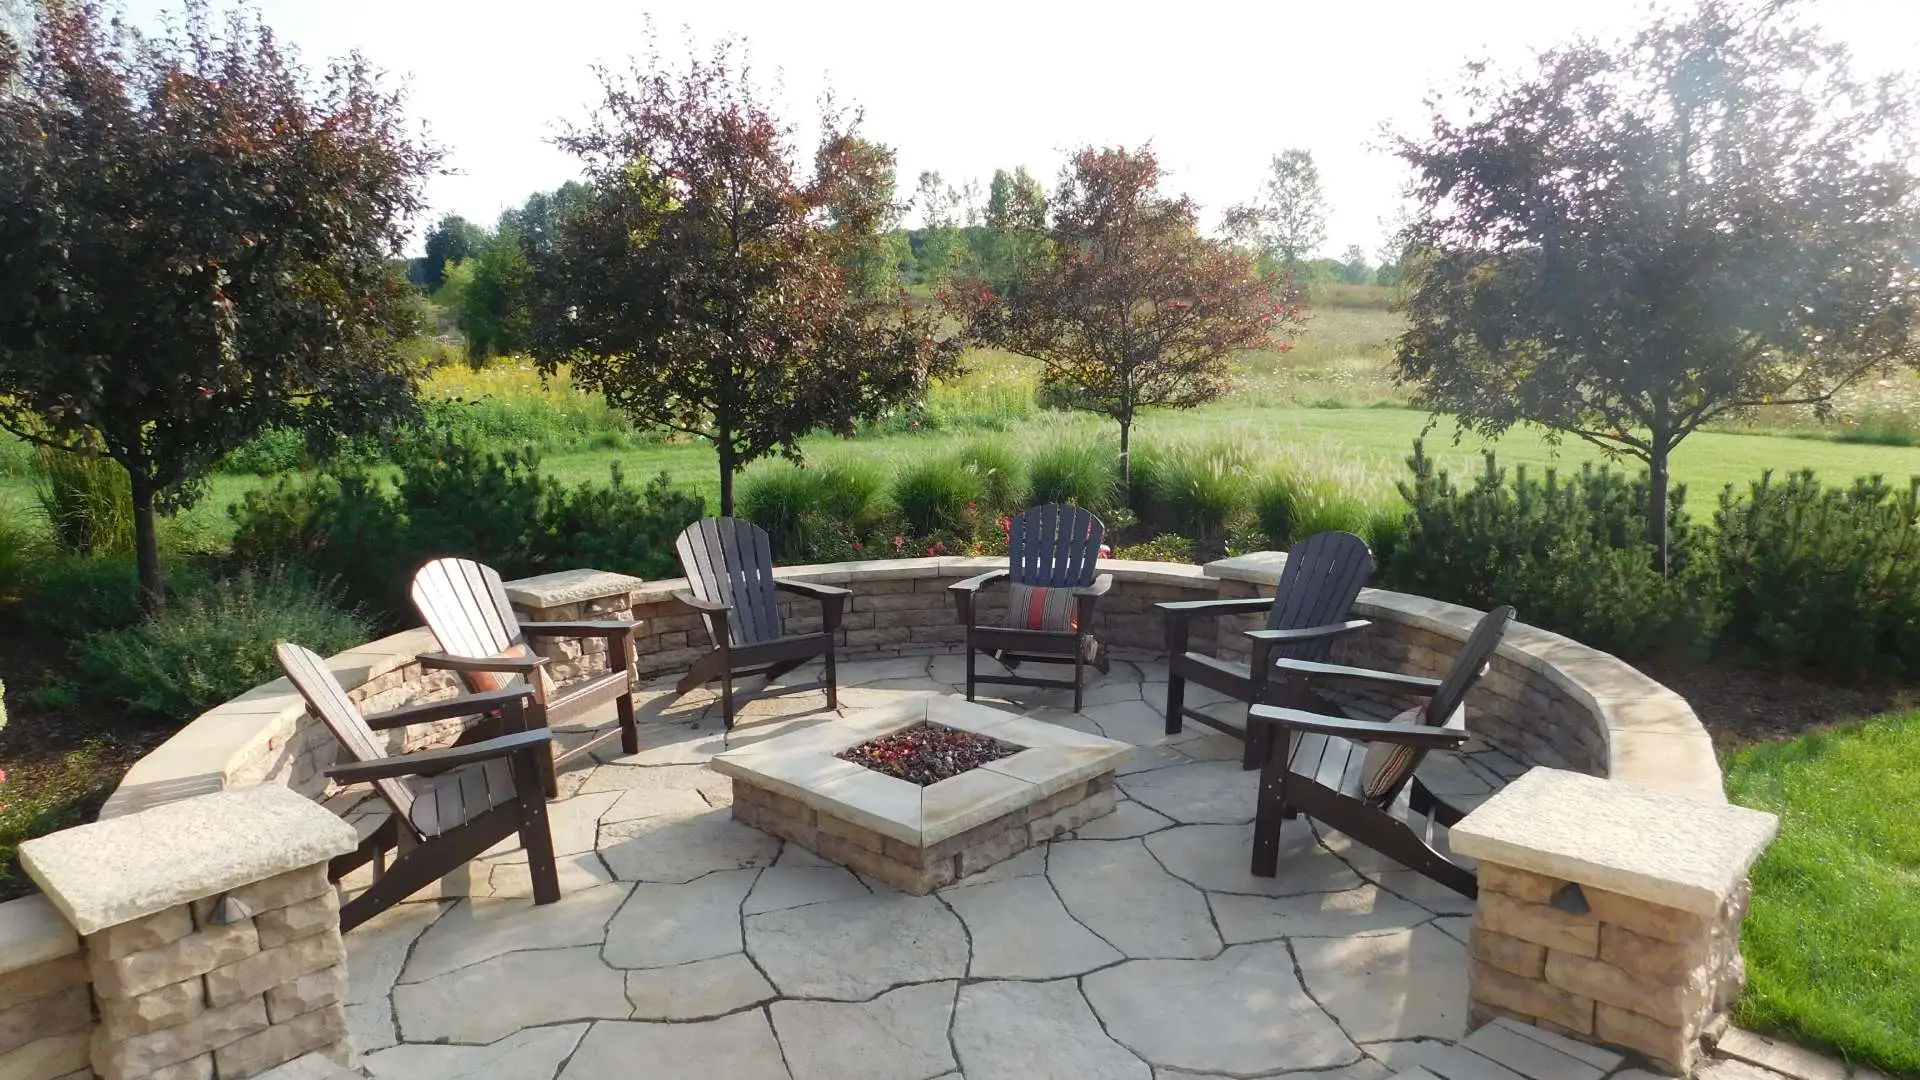 Fire Pit or Outdoor Fireplace? Consider These Factors Before Deciding